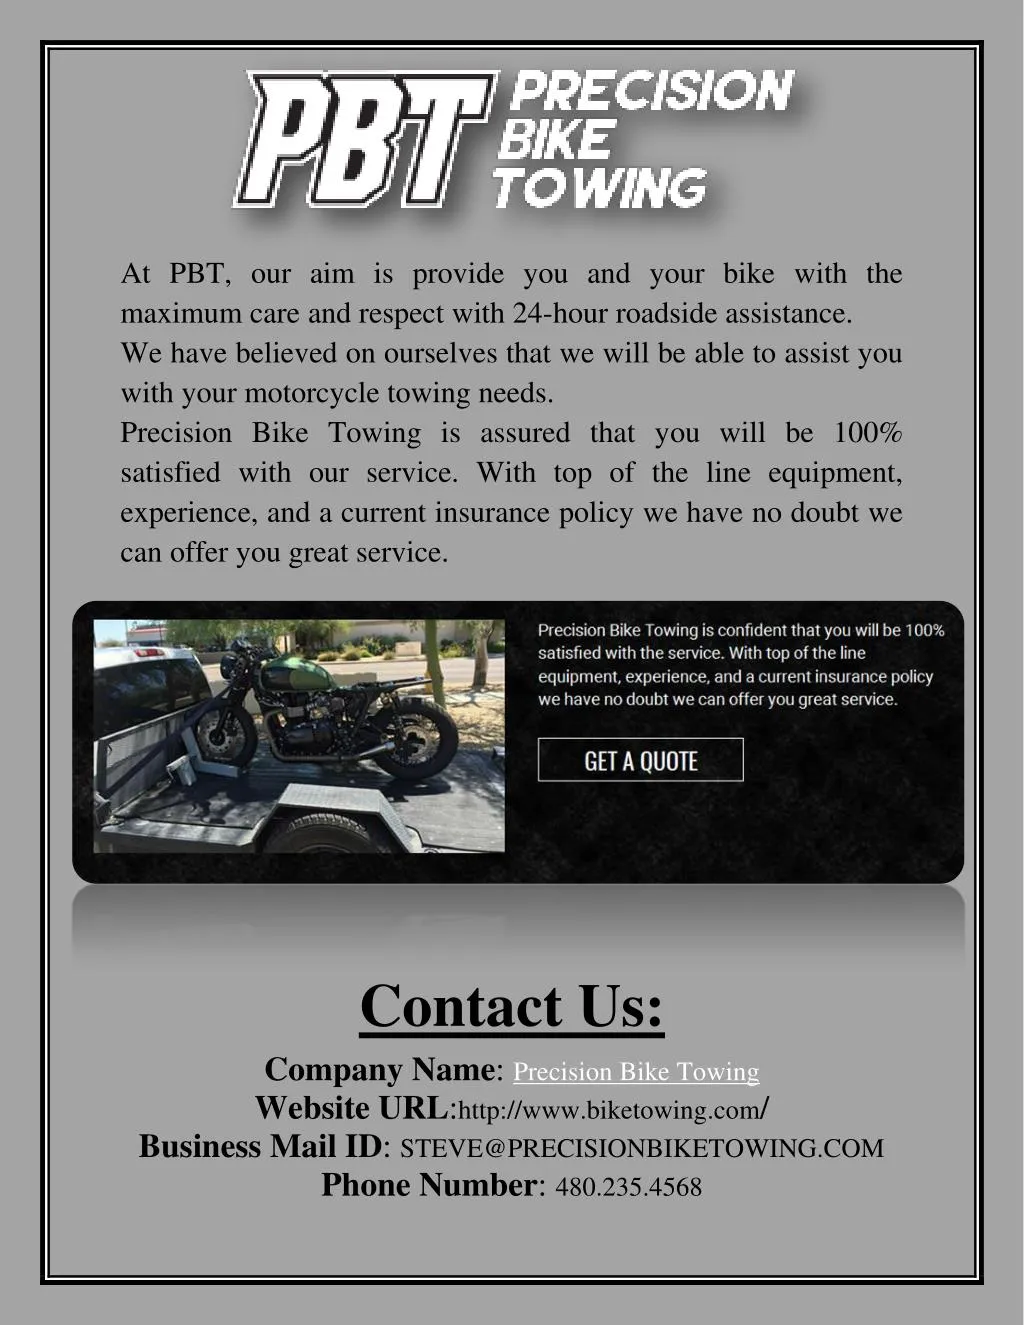 at pbt our aim is provide you and your bike with